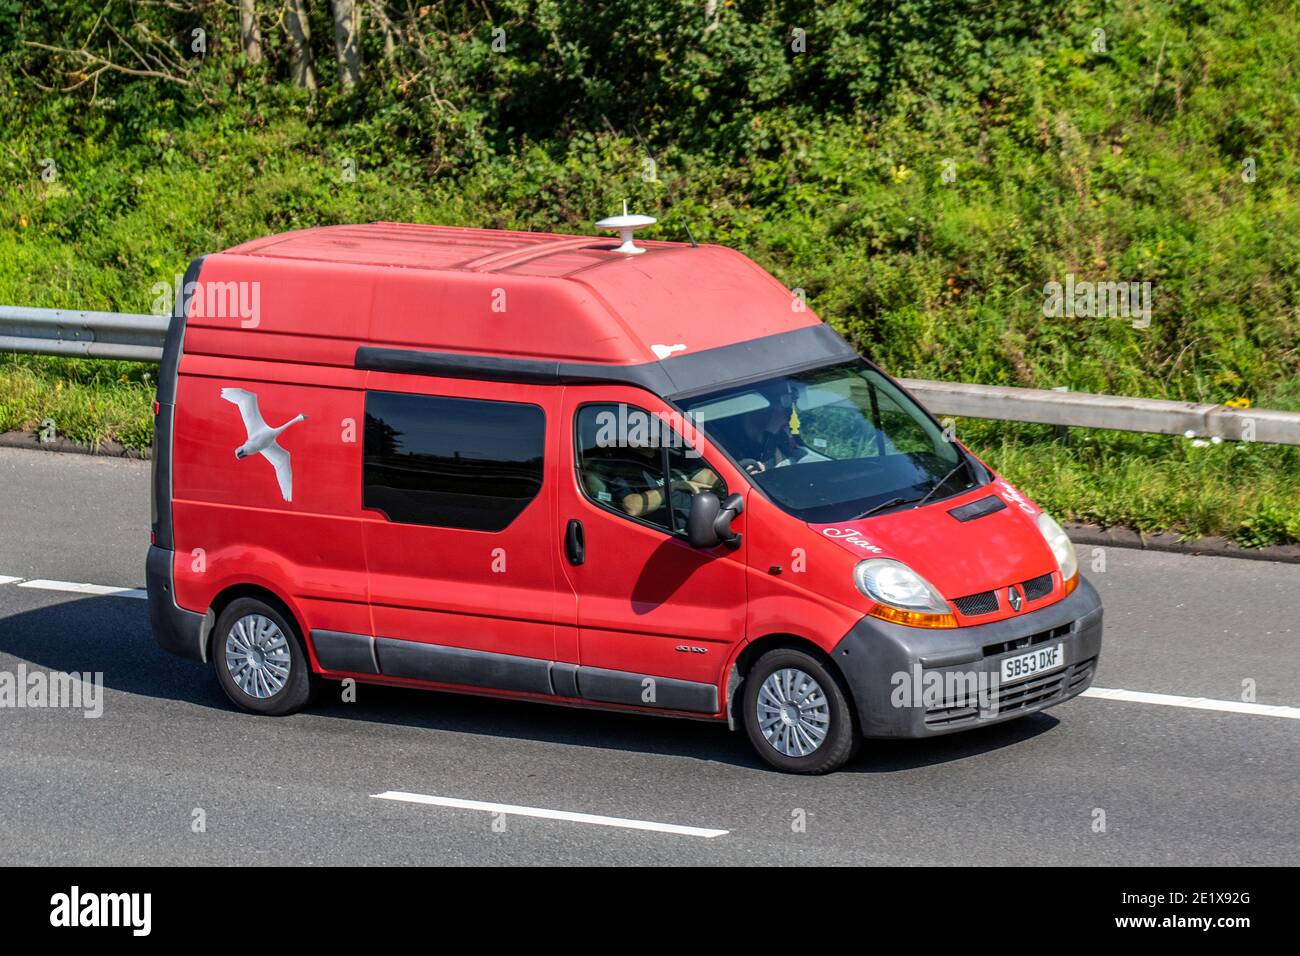 Renault Trafic High Resolution Stock Photography and Images - Alamy